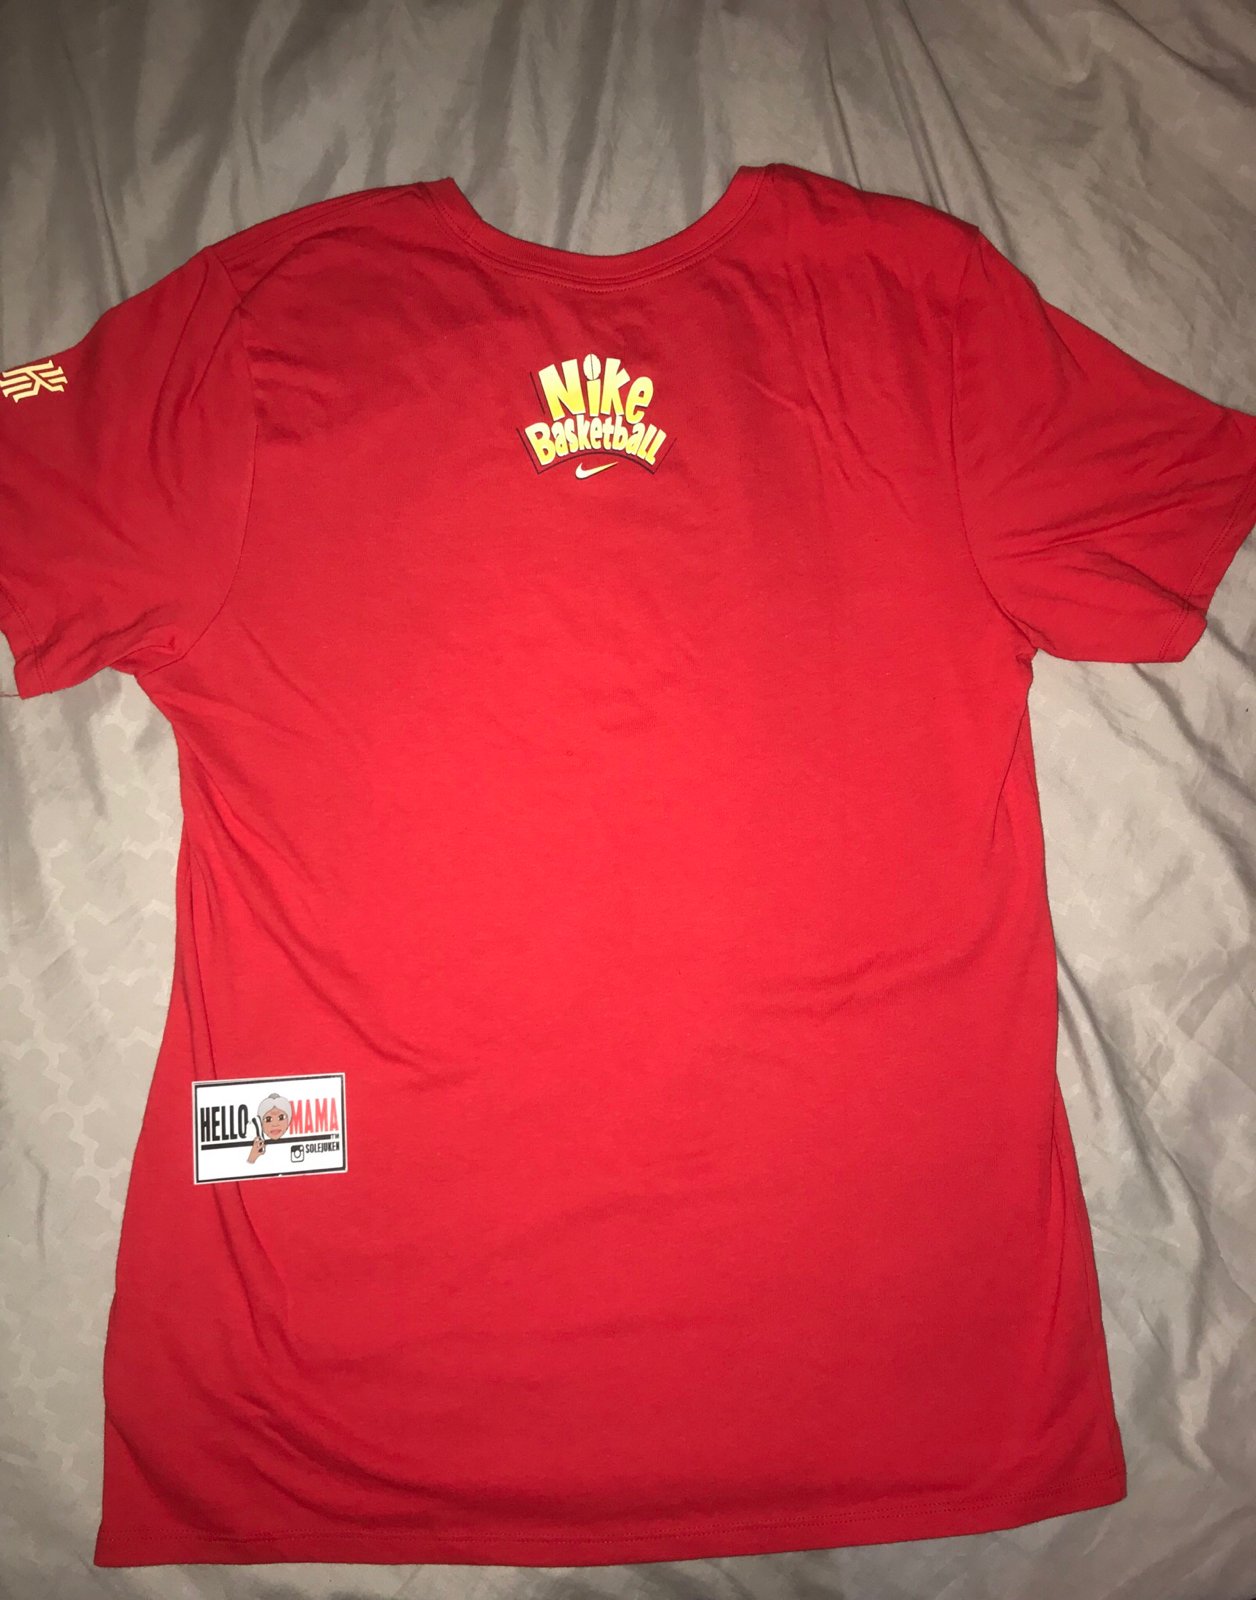 nike kyrie cereal shirt